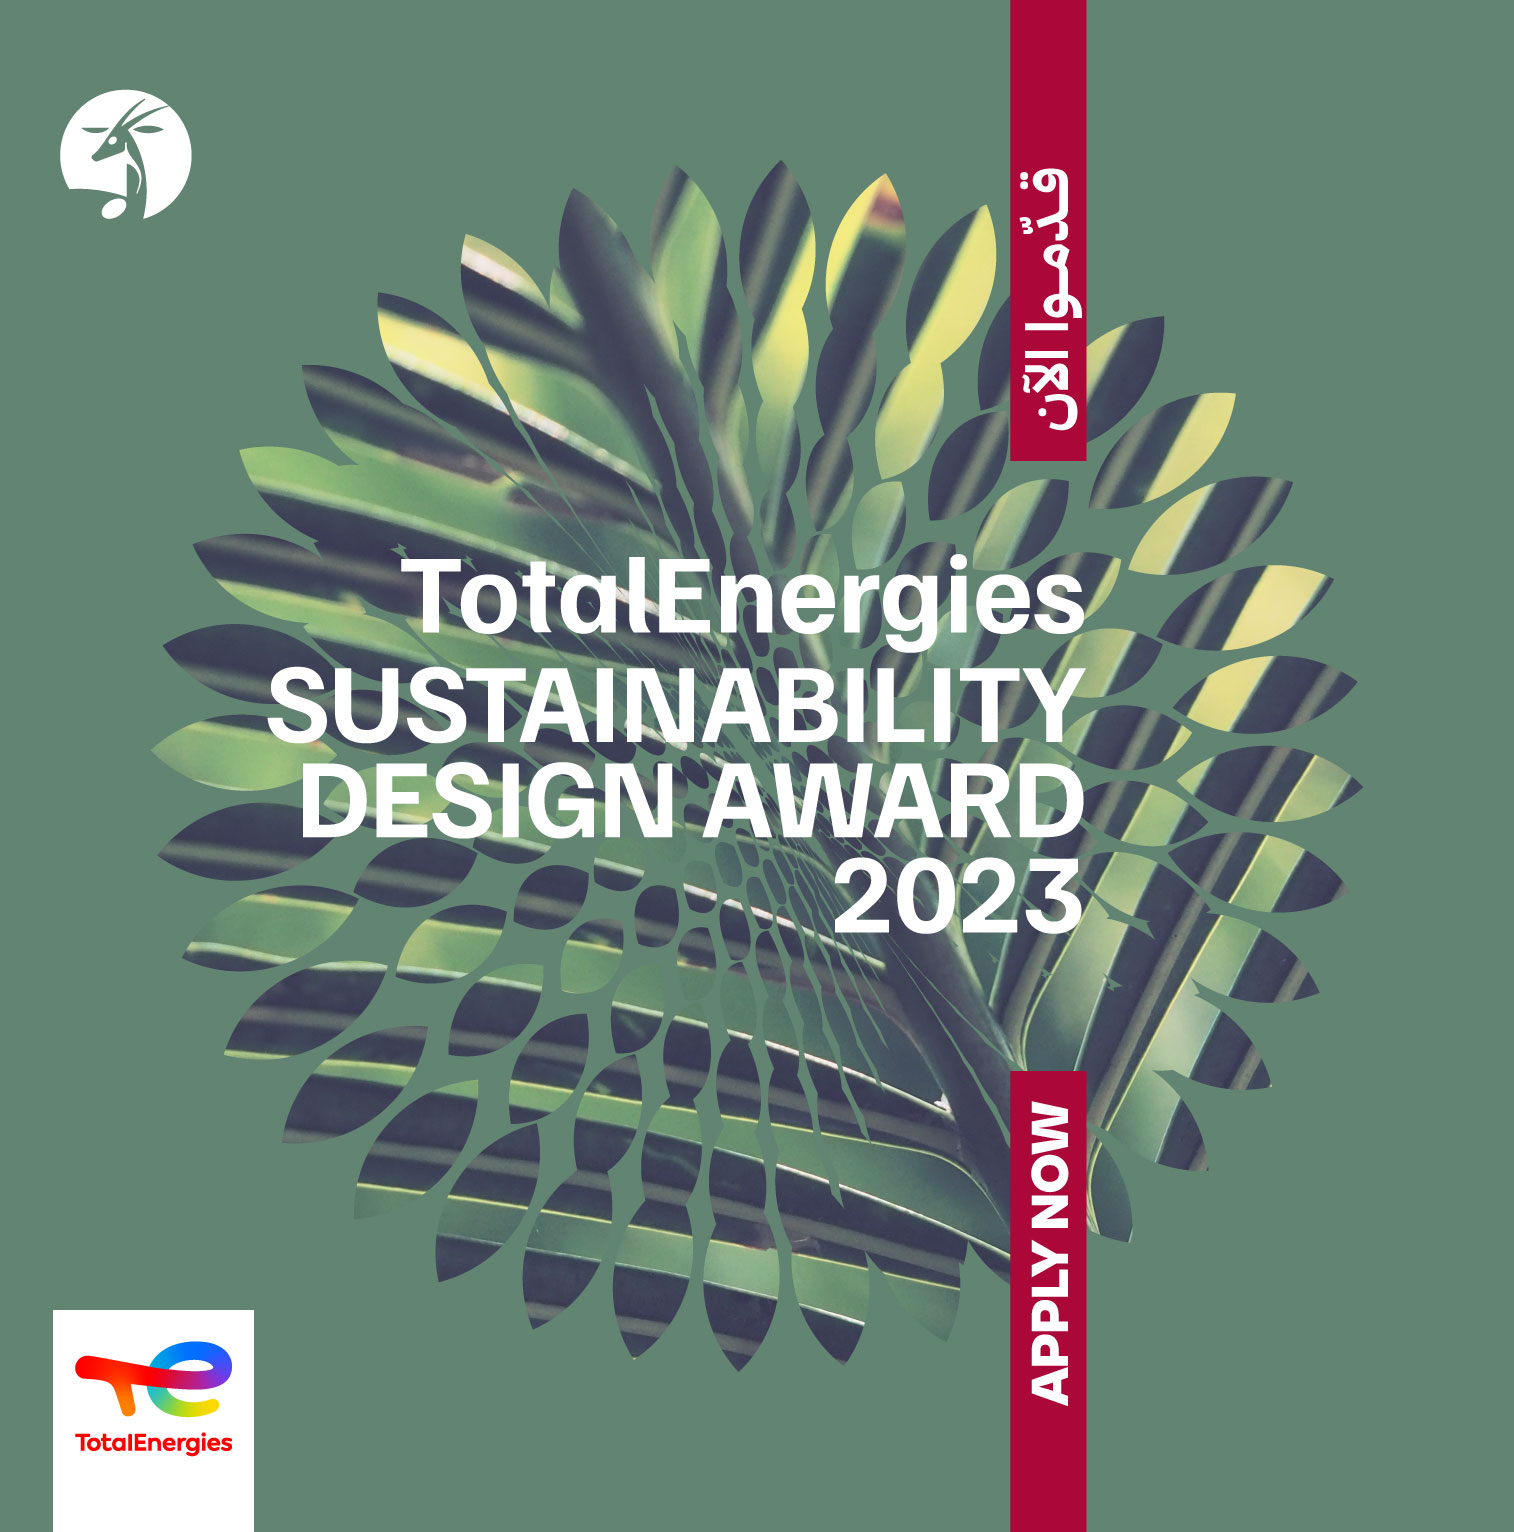 Image for The Abu Dhabi Music & Arts Foundation AnnouncesTotal Energies Sustainability Design Award 2023 Open Call For Submissions